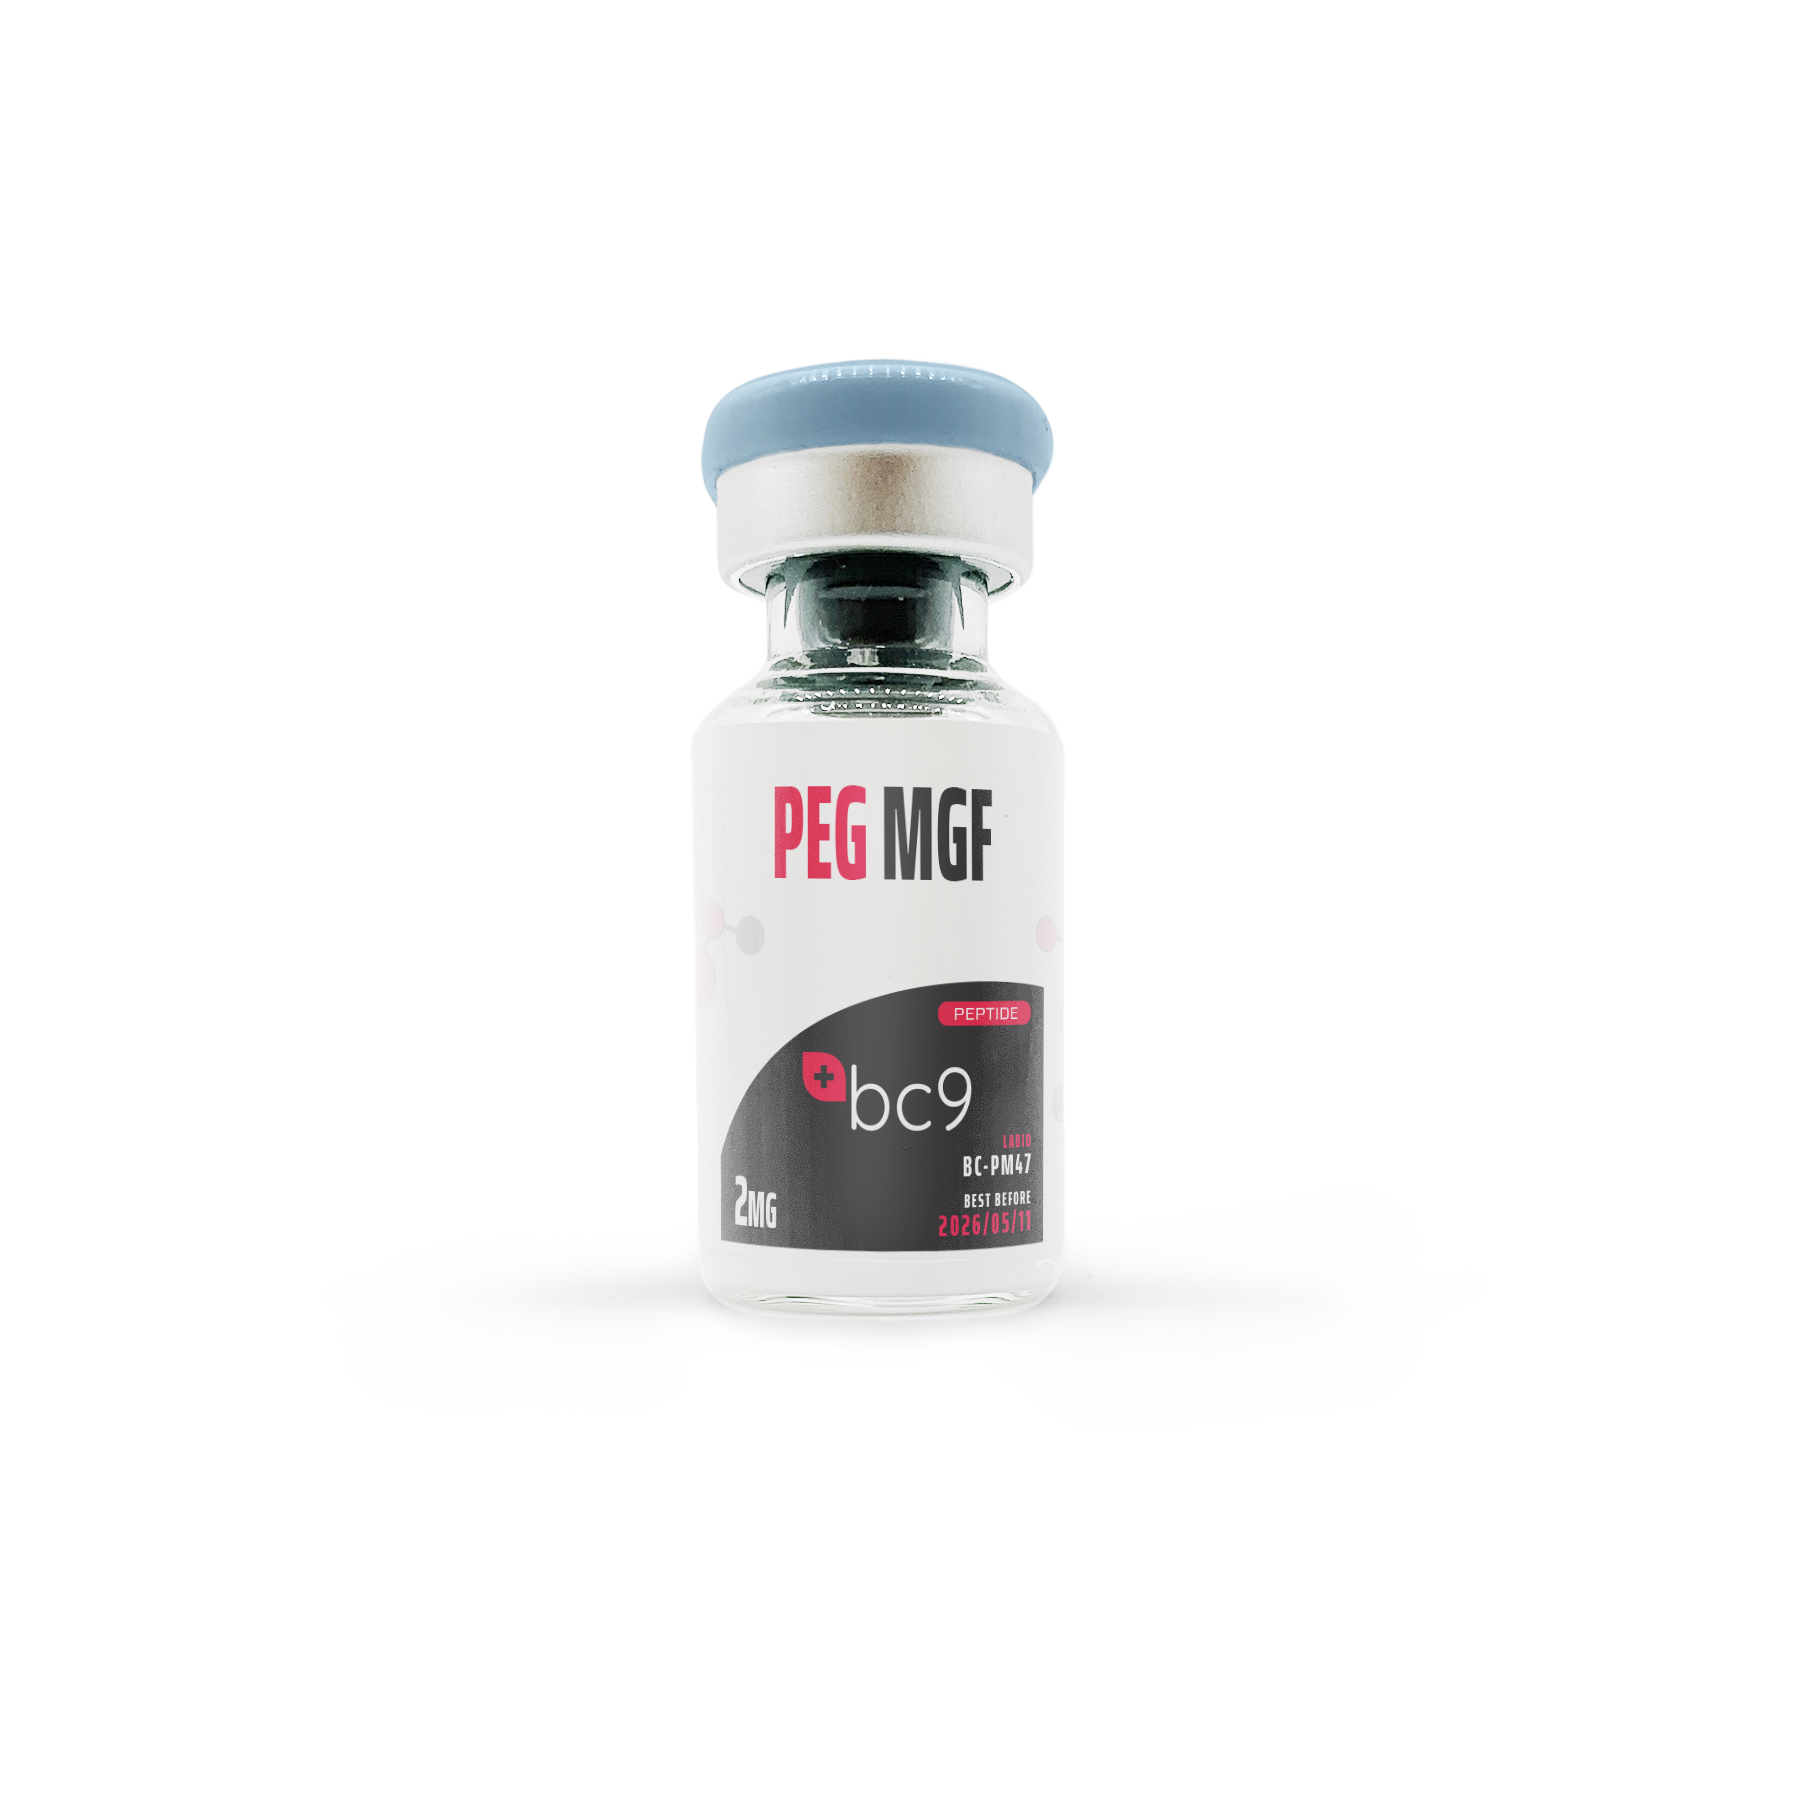 PEG MGF Peptide for Sale | Fast Shipping | BC9.org